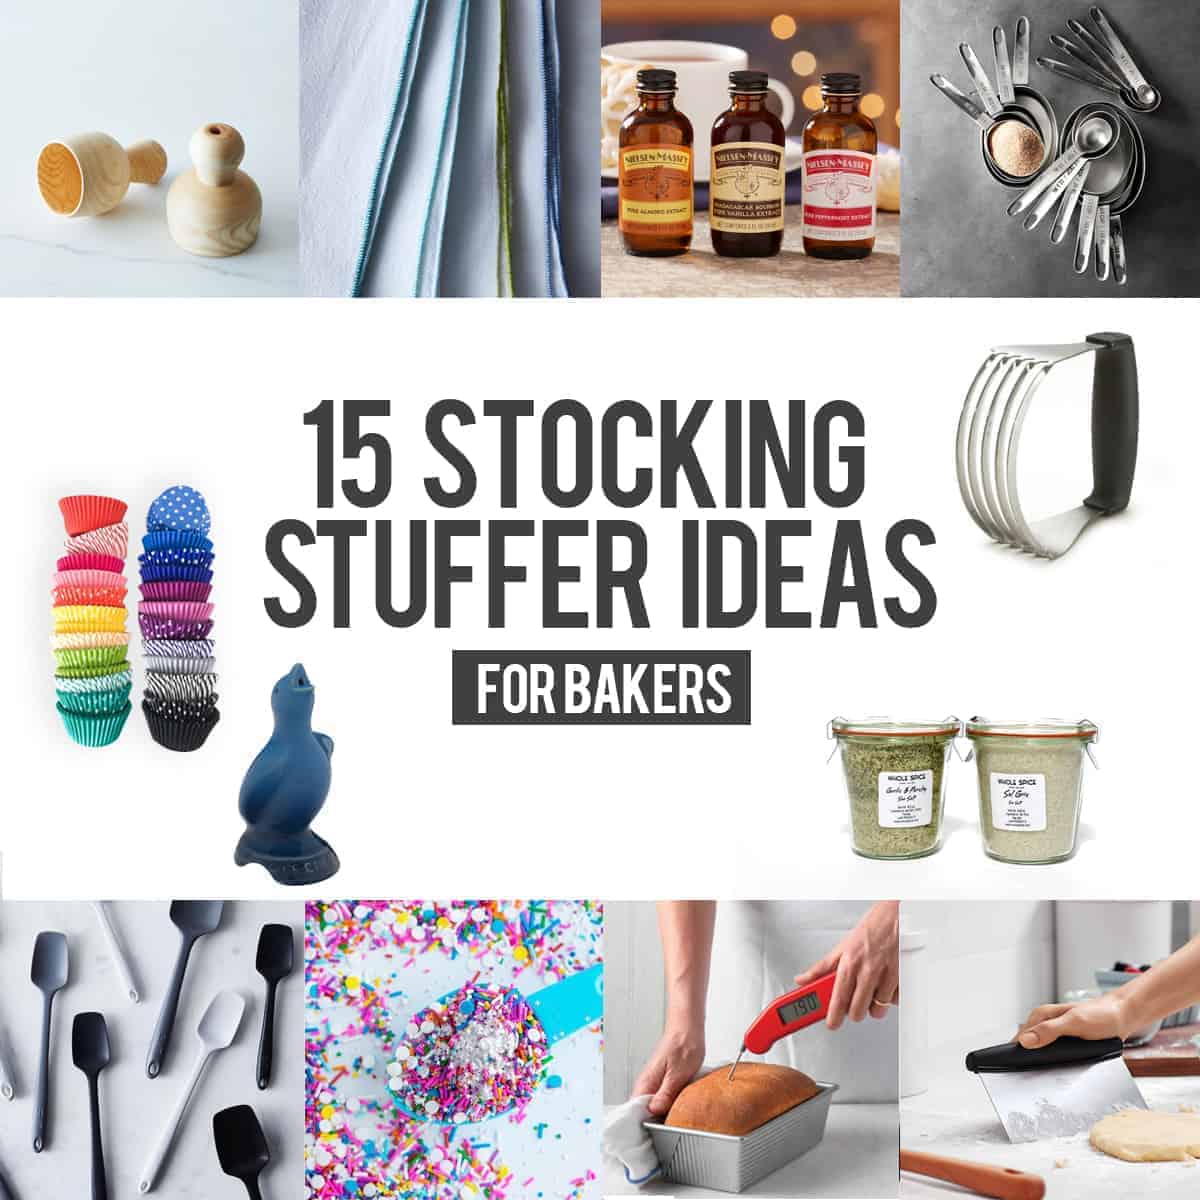 Need some help knowing what to get the baker in your life? Check out these 15 stocking stuffer ideas, perfect for anyone who loves baking!